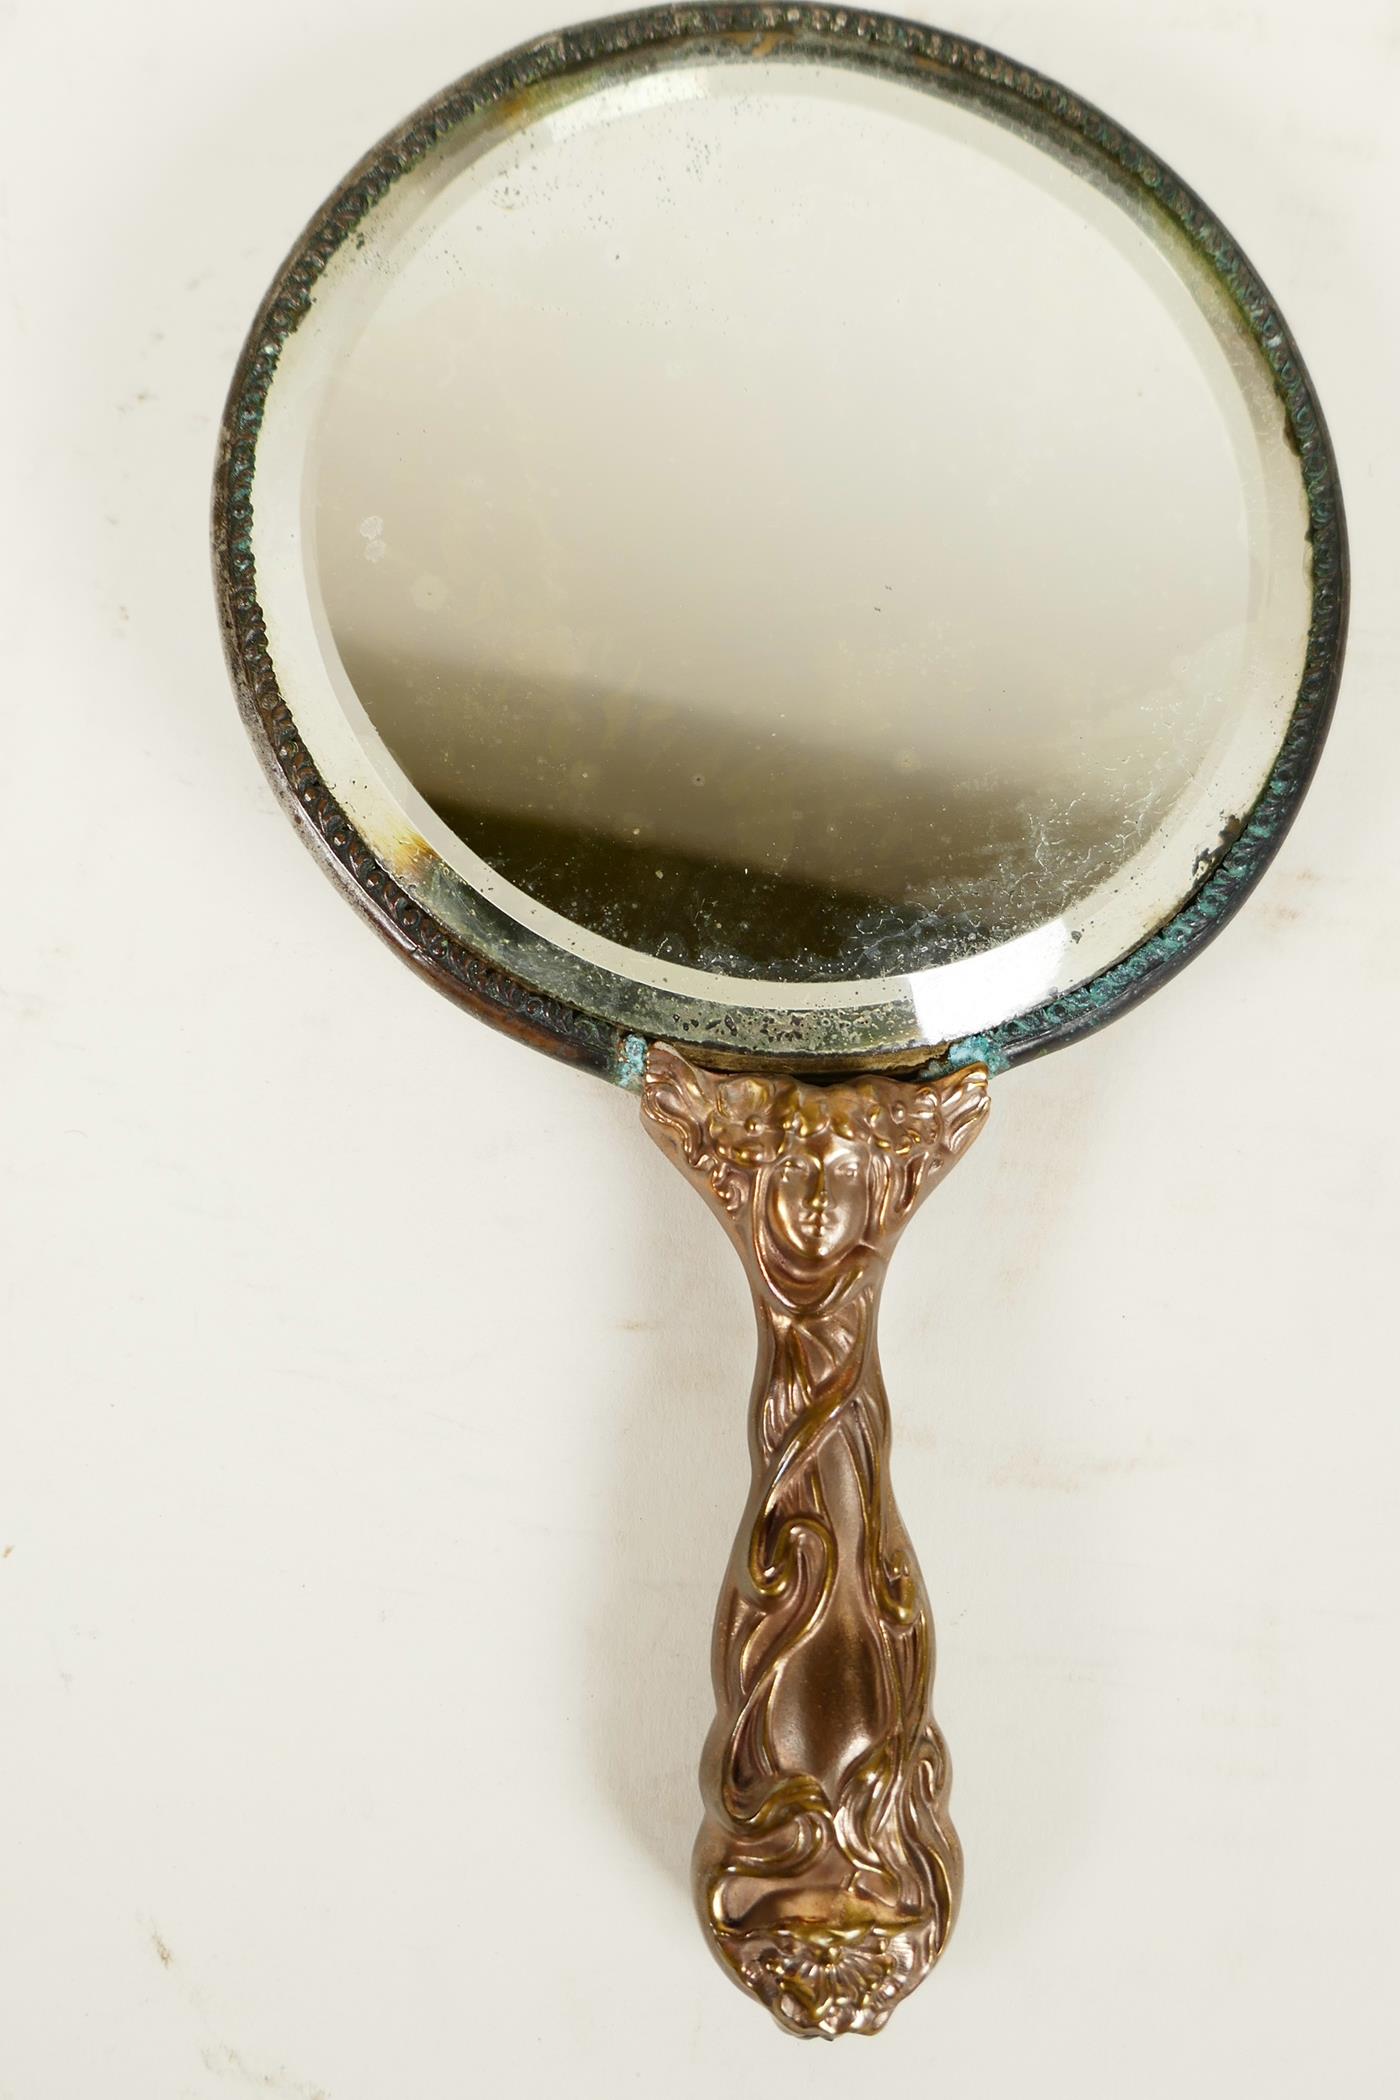 A C19th Art Nouveau bronze hand mirror embossed with scrolls and faces, and bejewelled glass mirror, - Image 4 of 4